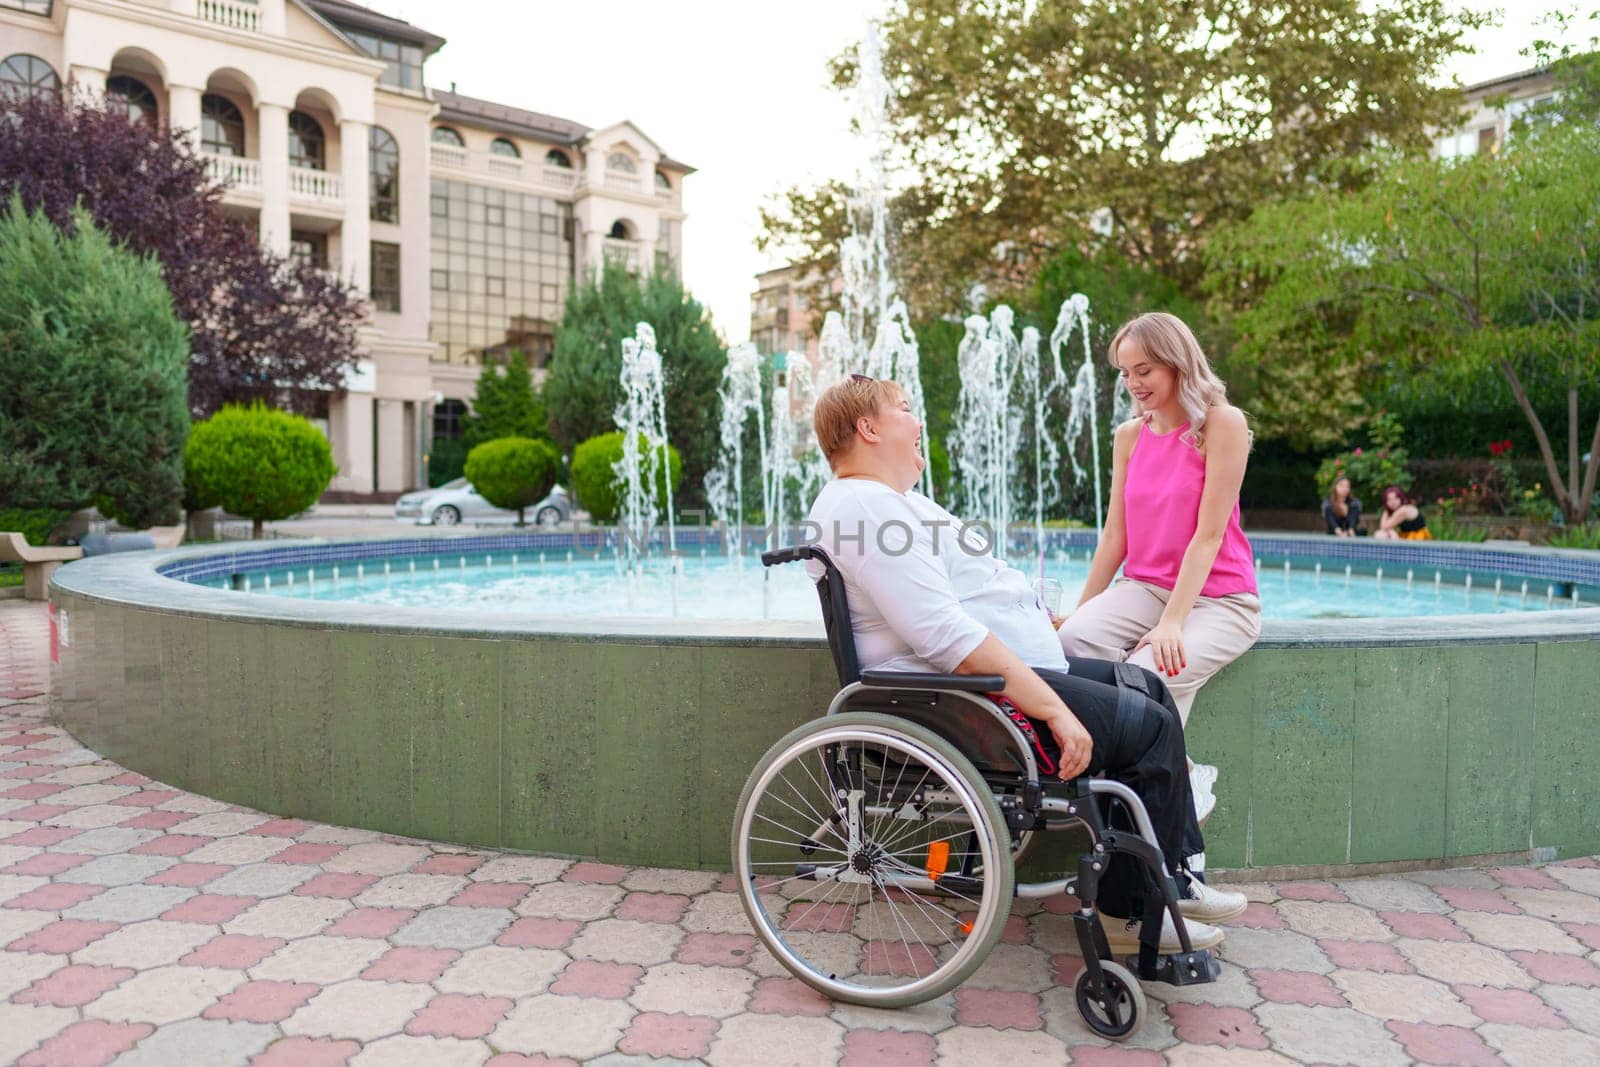 Young daughter taking care of her mother with disability sitting in wheelchair, portrait